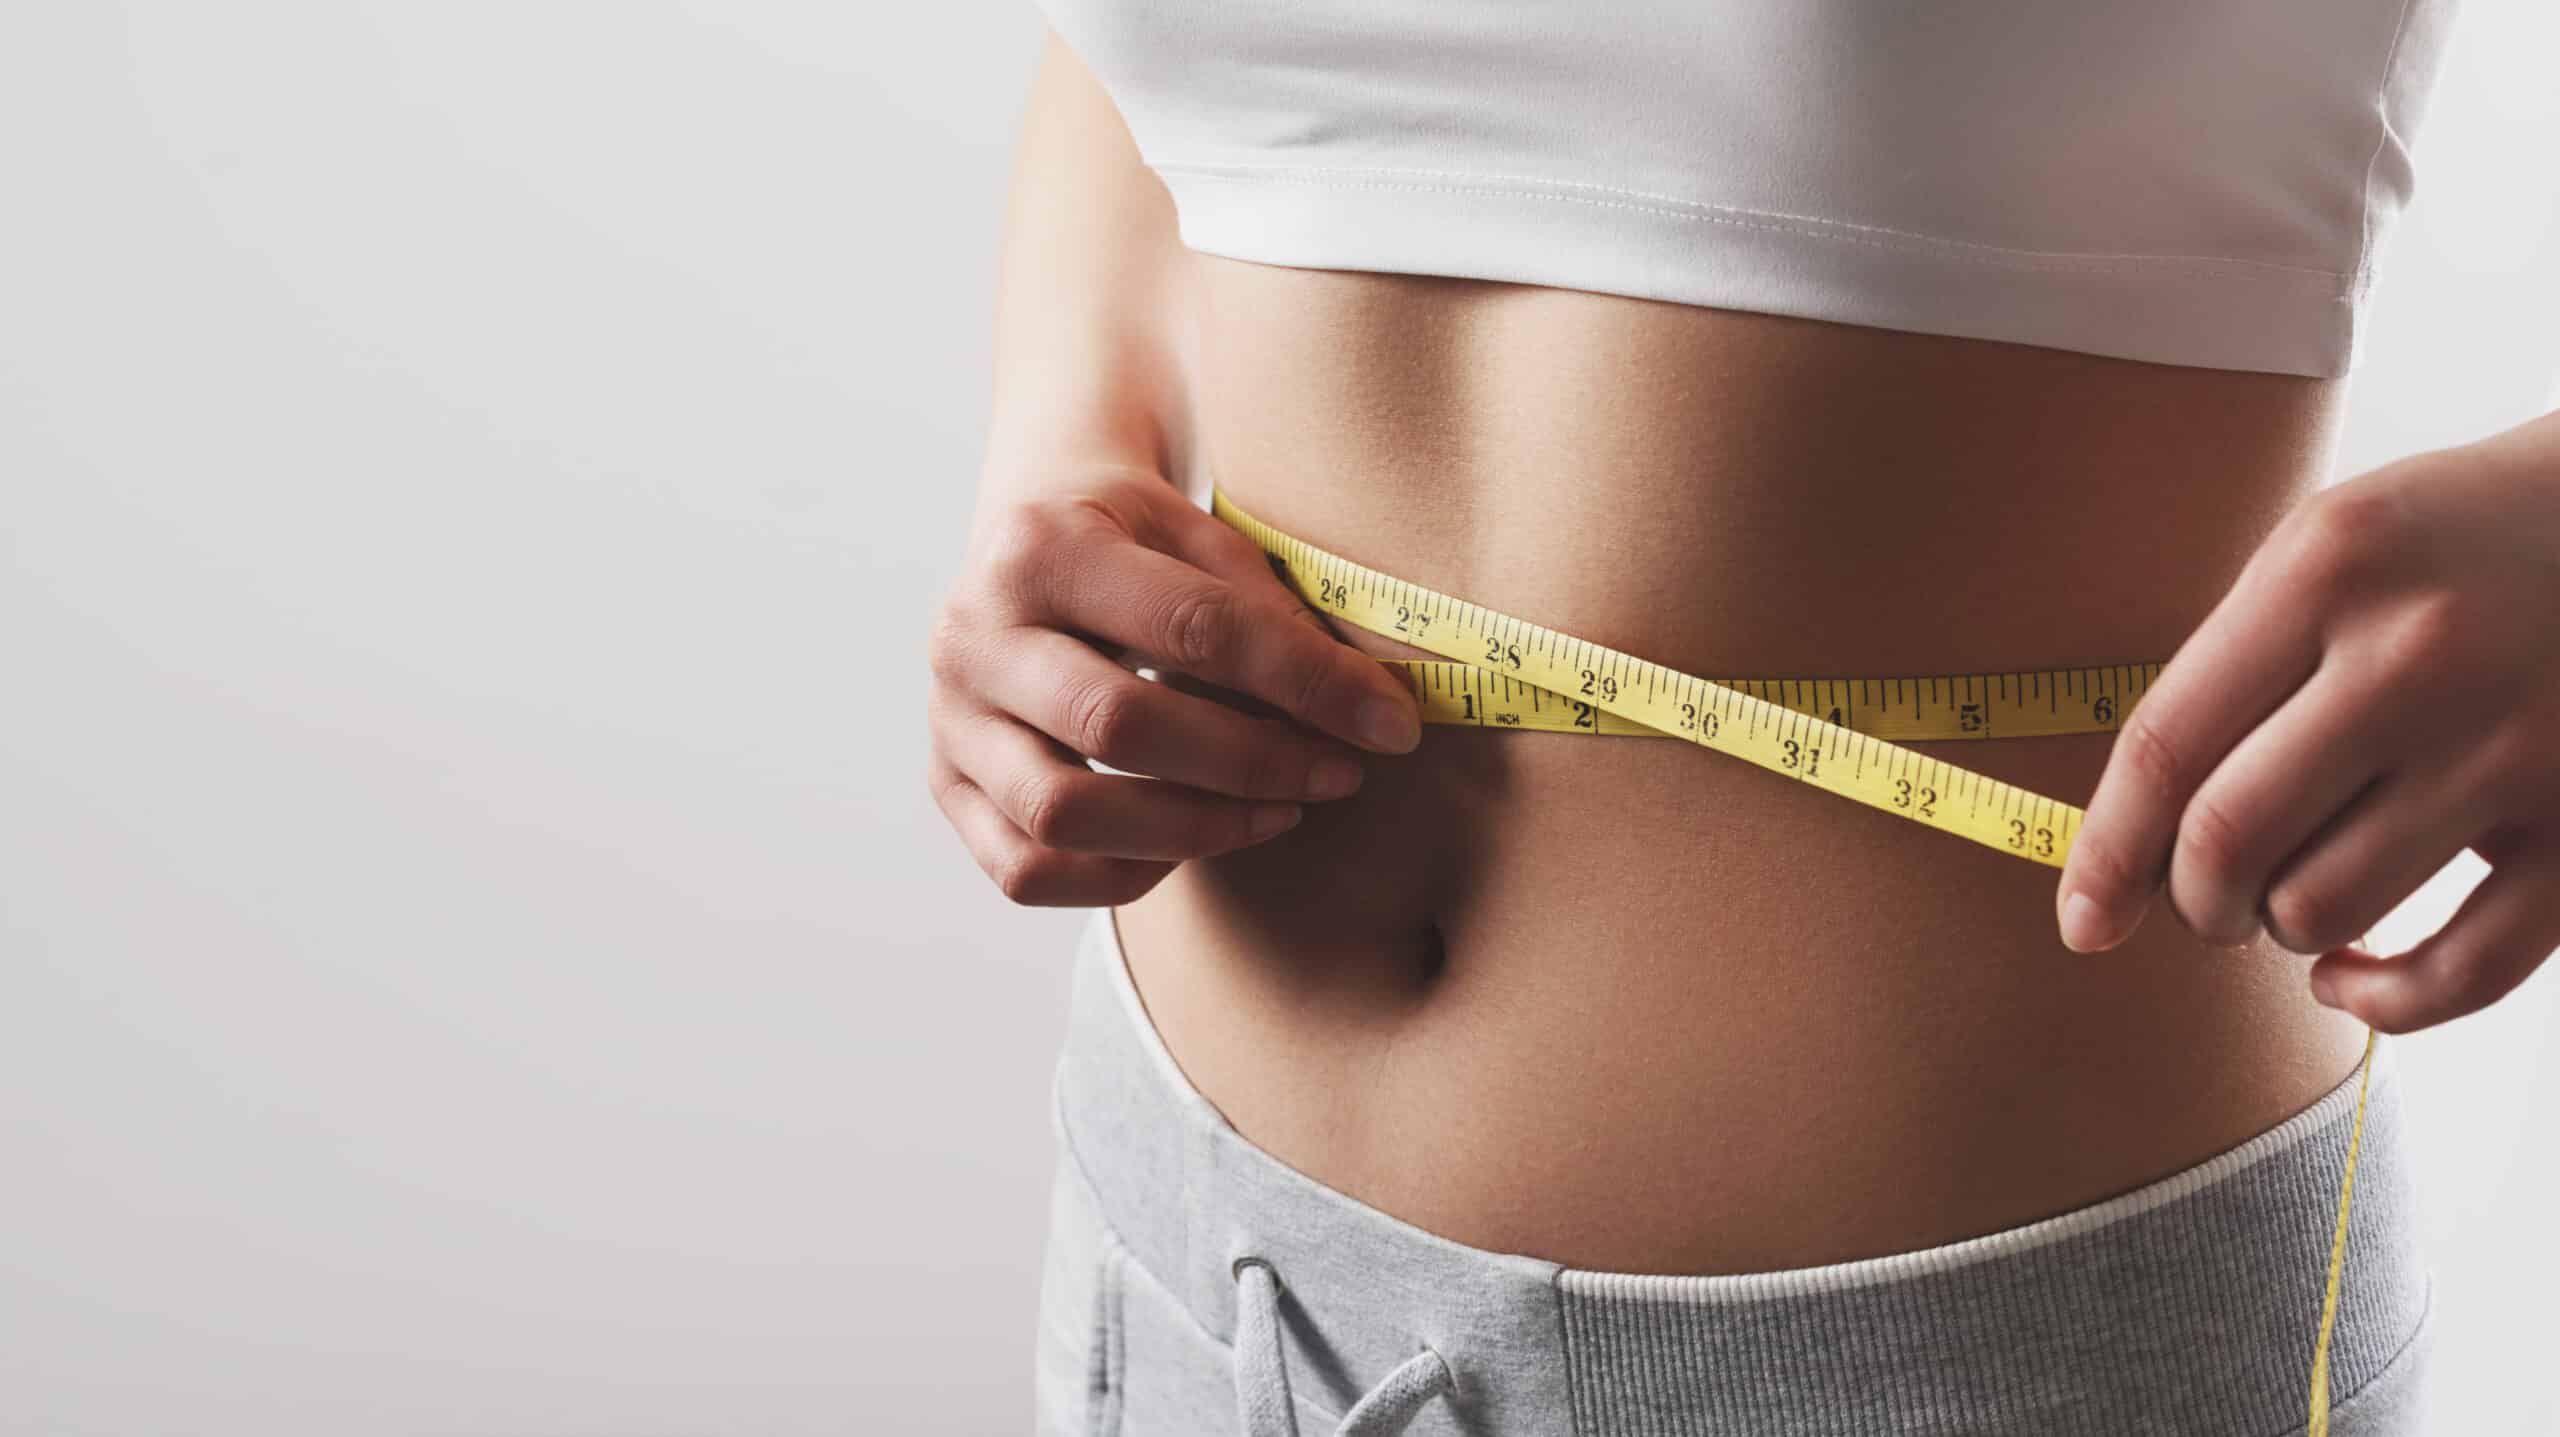 Is a 28 Inch Waist Healthy for a Woman?